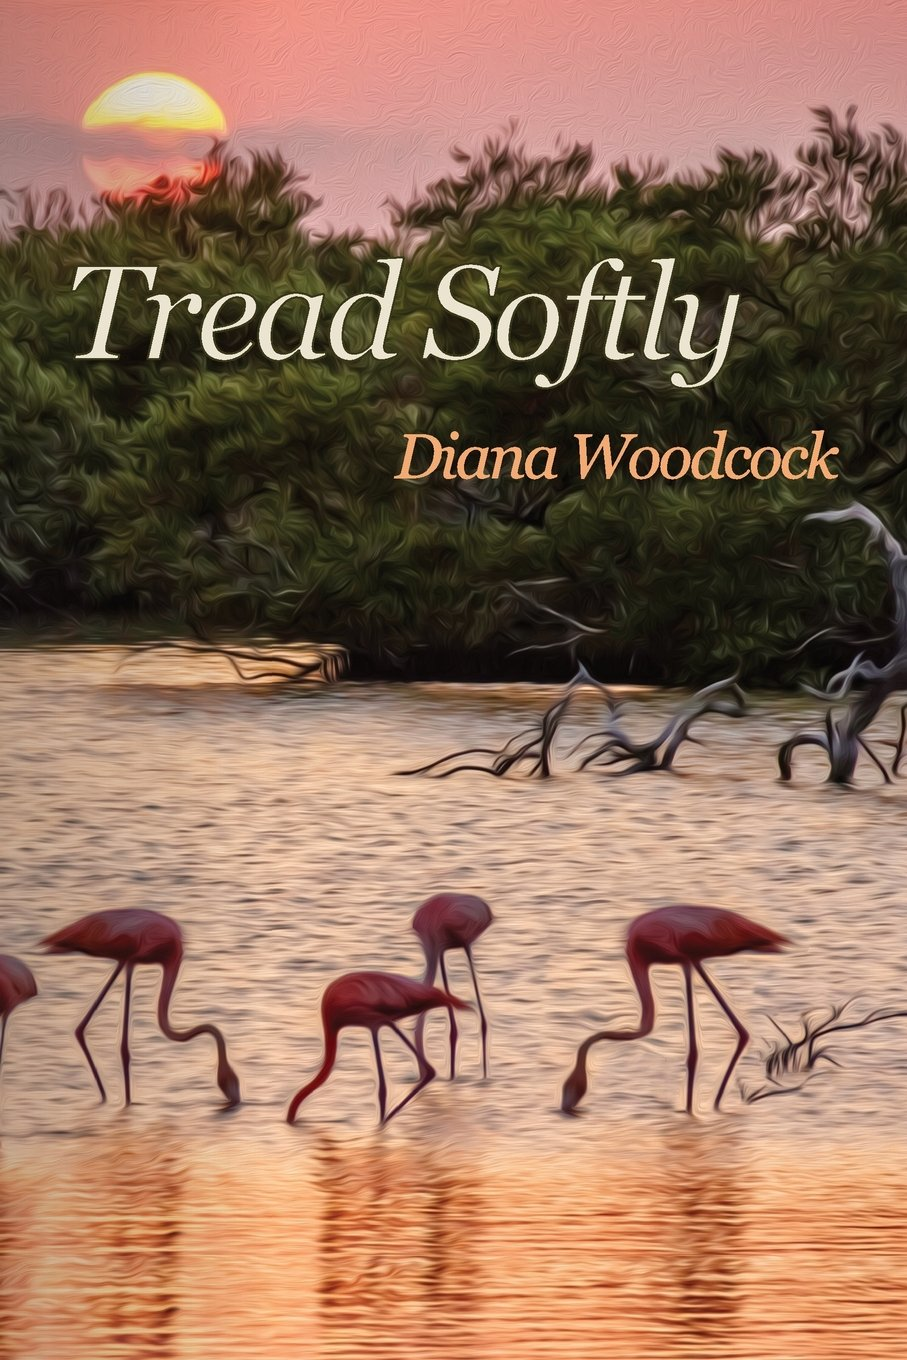 Book cover of TREAD SOFTLY by Dr. Diana Woodcock.